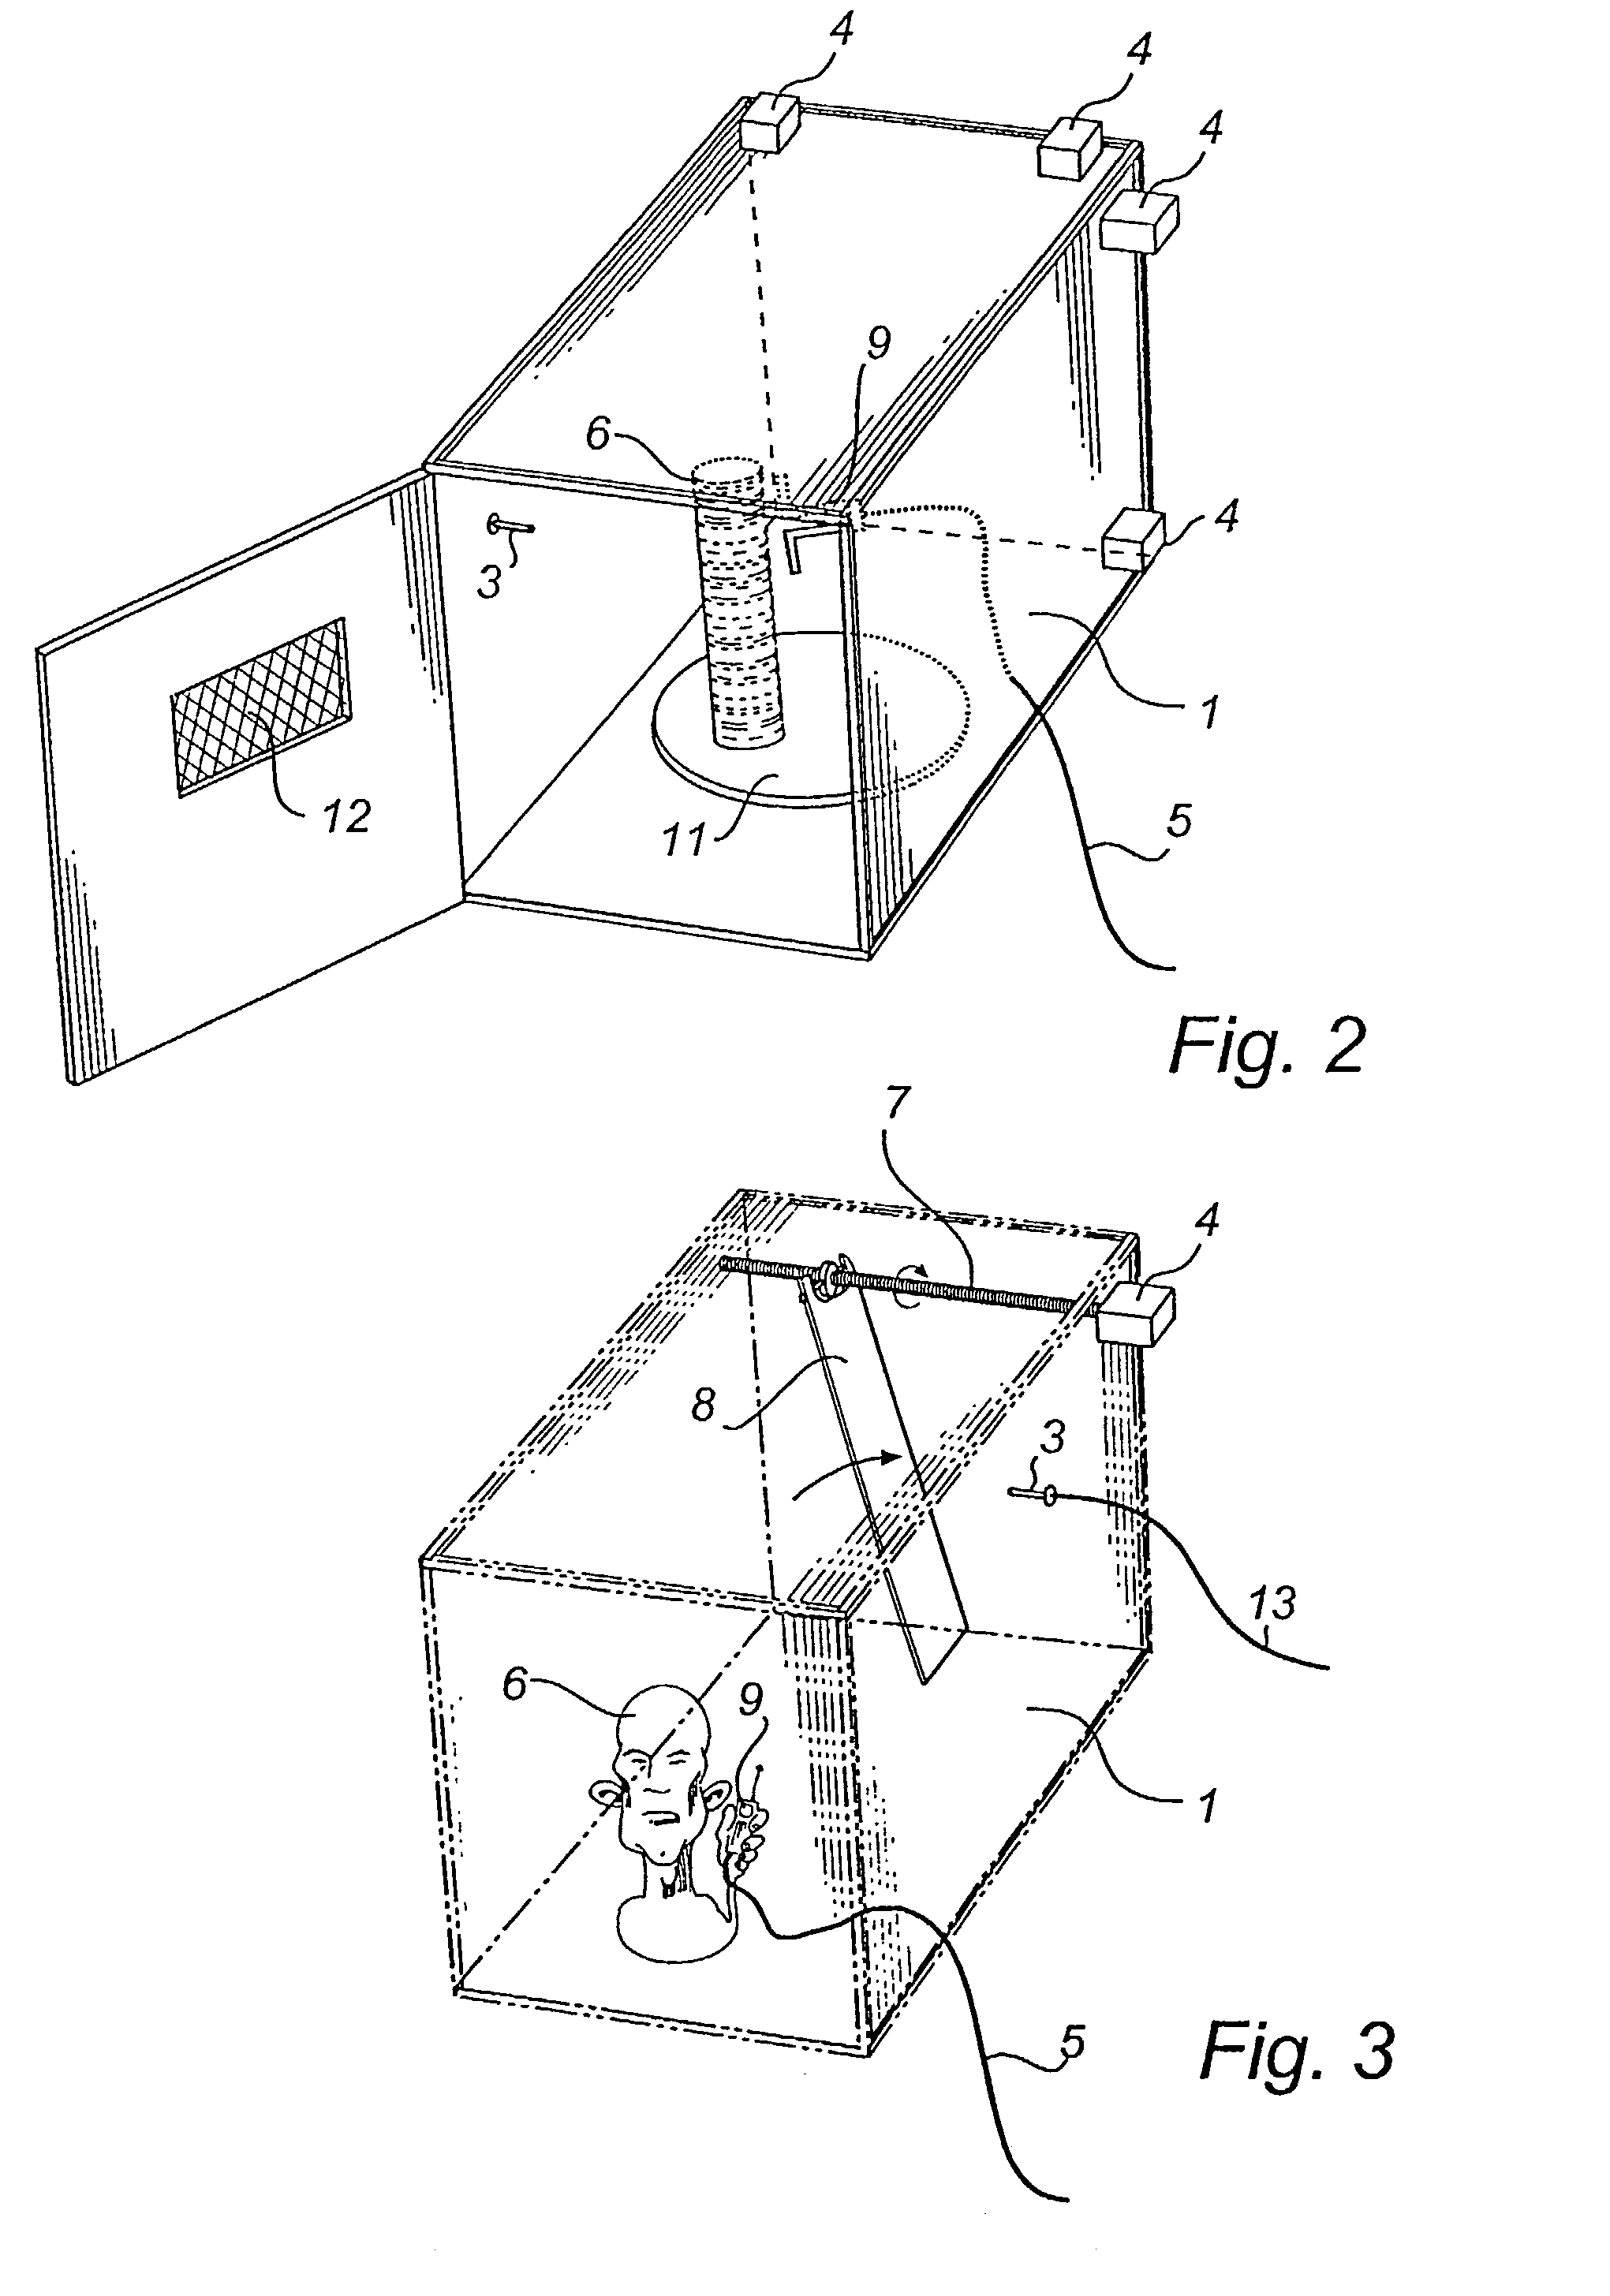 Method and an apparatus for measuring the performance of antennas, mobile phones and other wireless terminals